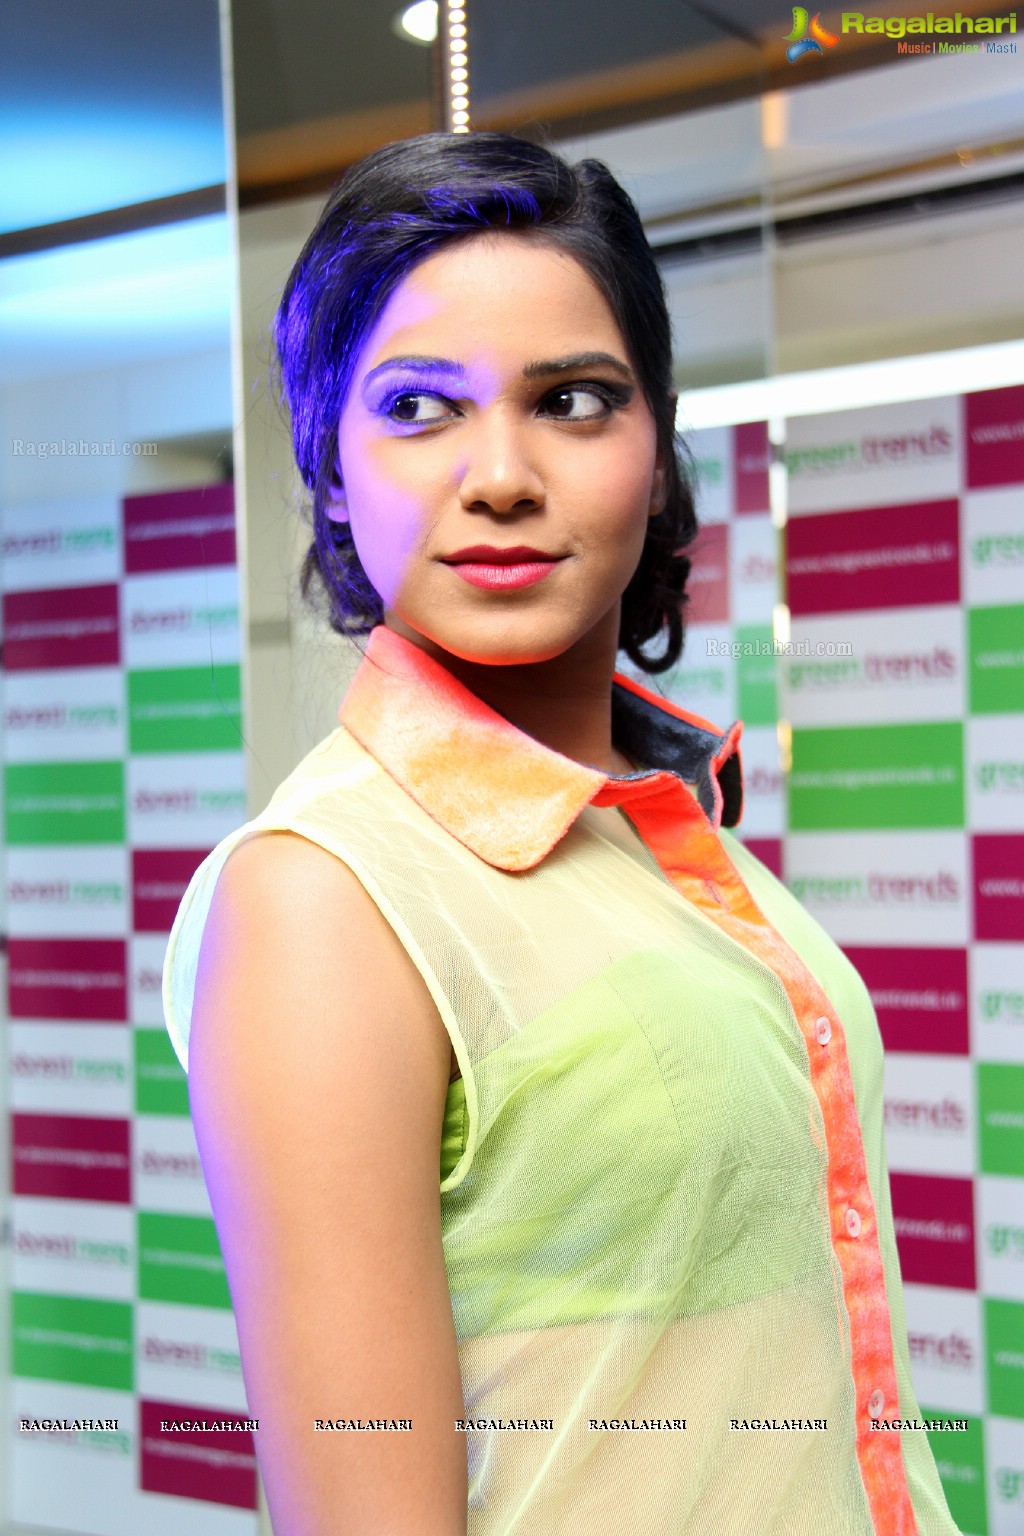 Green Trends launches its 158th Salon at Kavuri Hills, Hyderabad